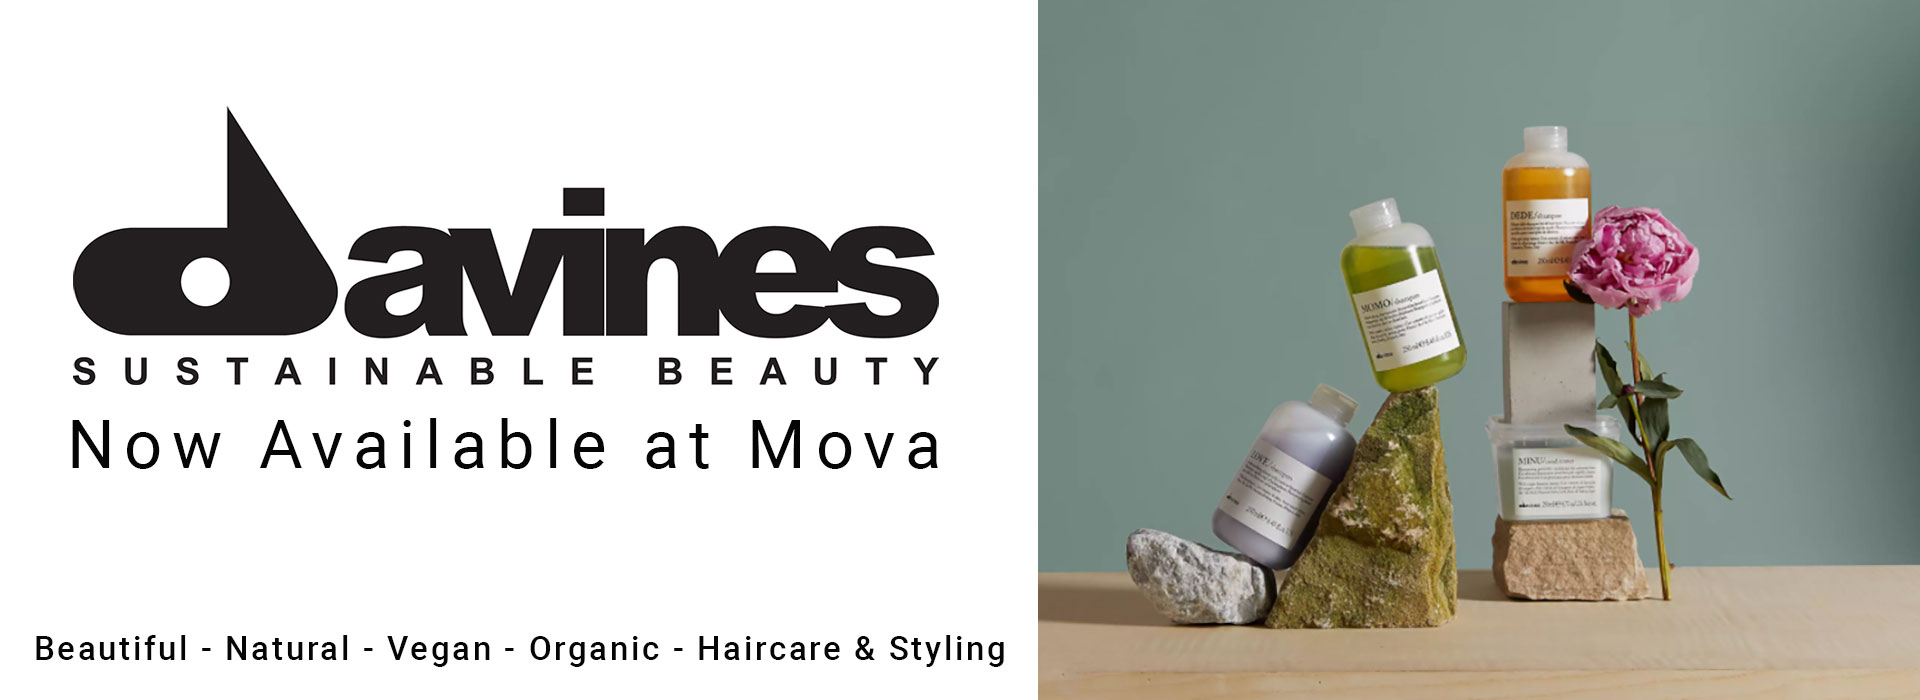 Davines products at Mova Salons in Staines and Virginia Water 2